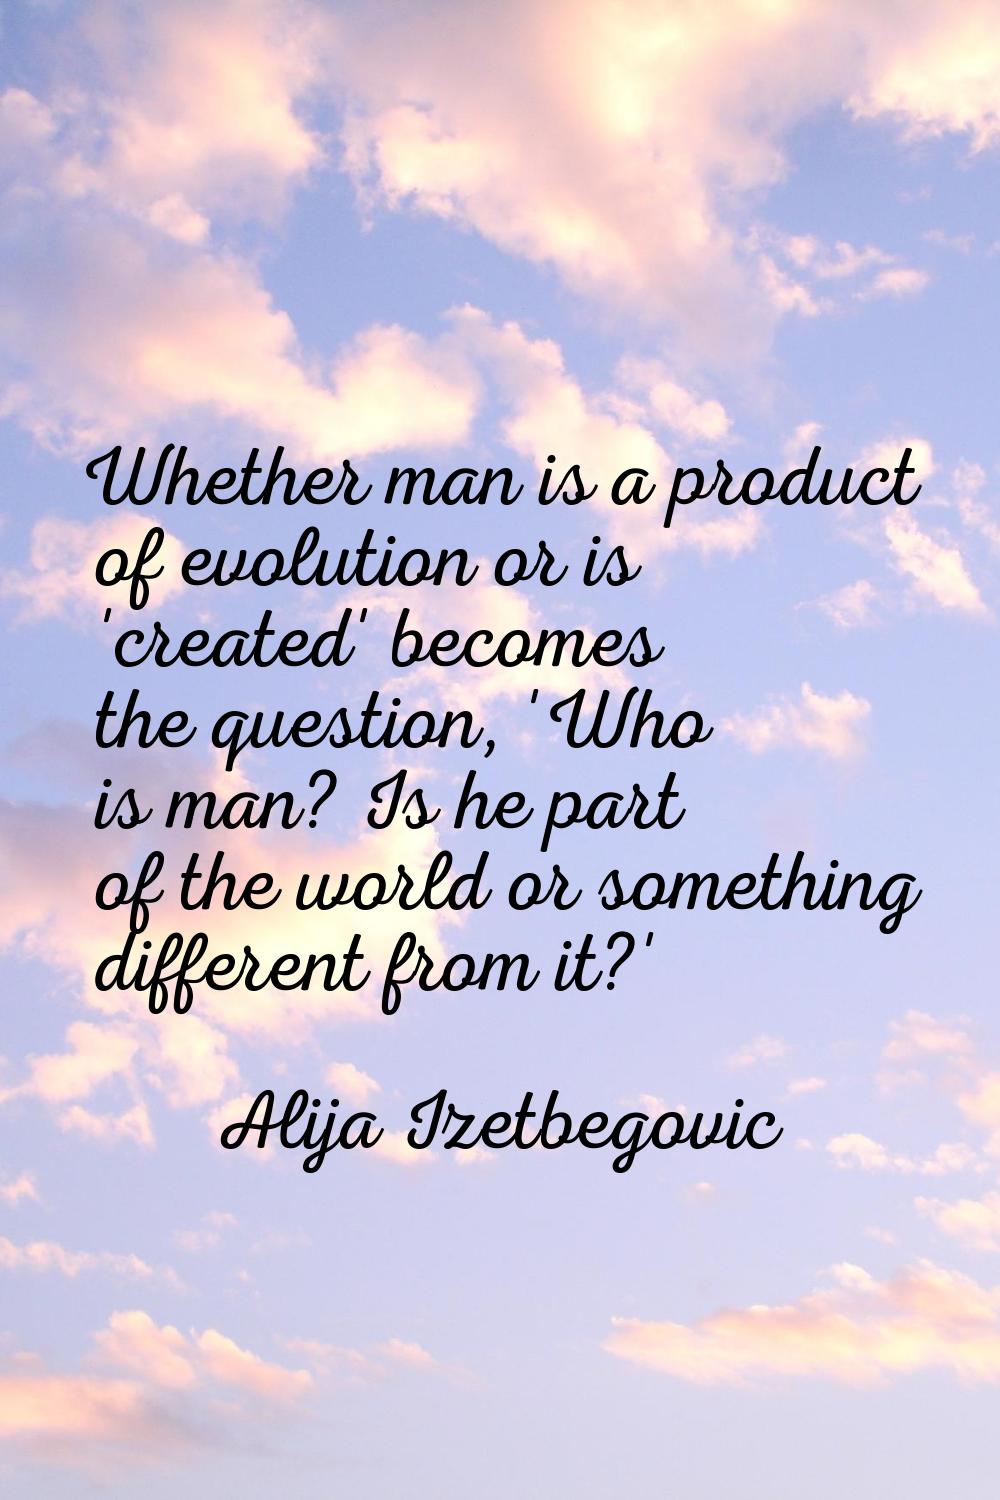 Whether man is a product of evolution or is 'created' becomes the question, 'Who is man? Is he part